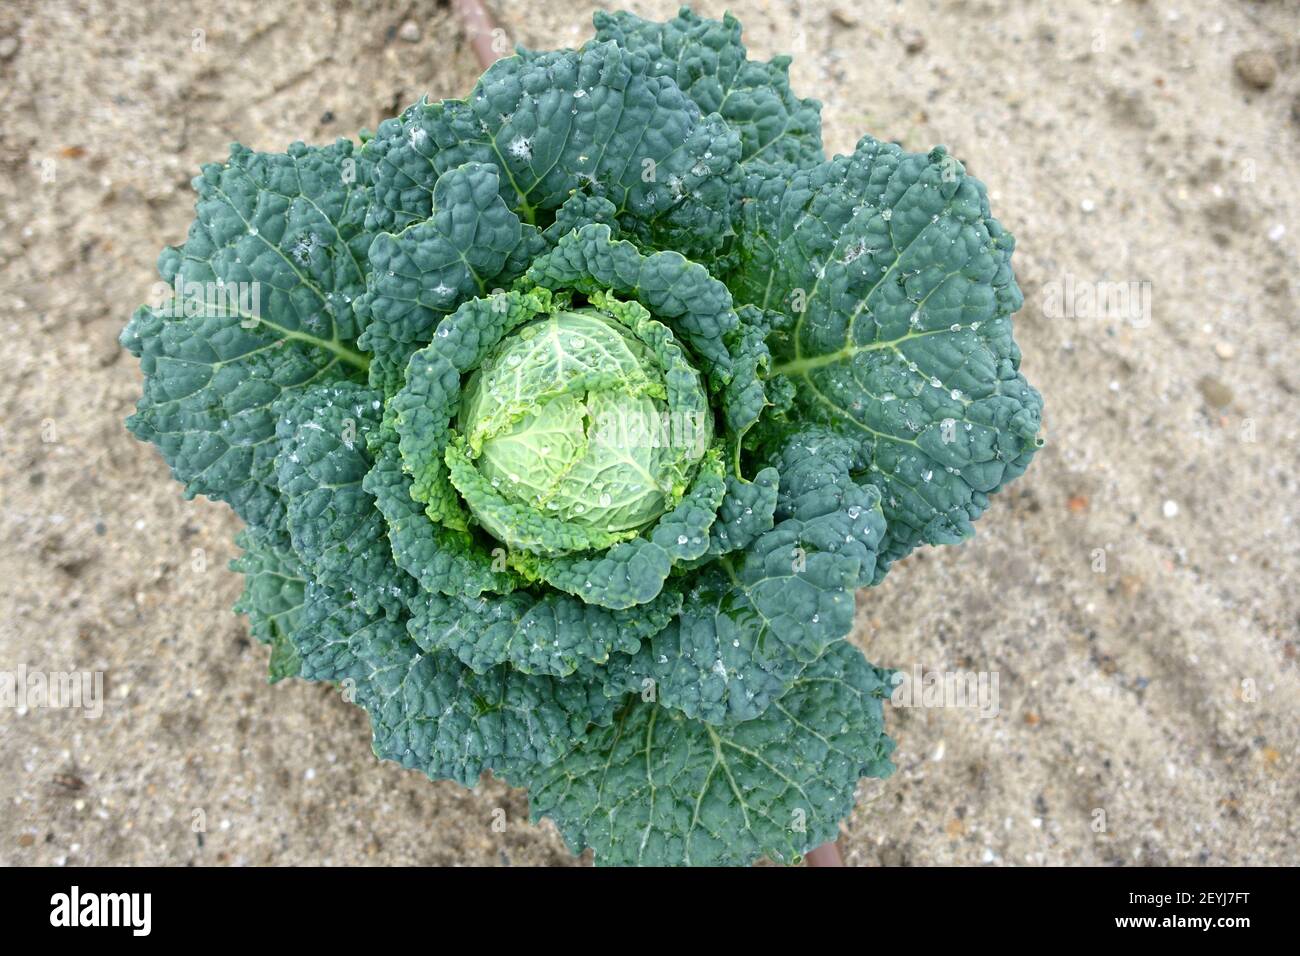 Top view of a Savoy cabbage plant growing in the ground Stock Photo